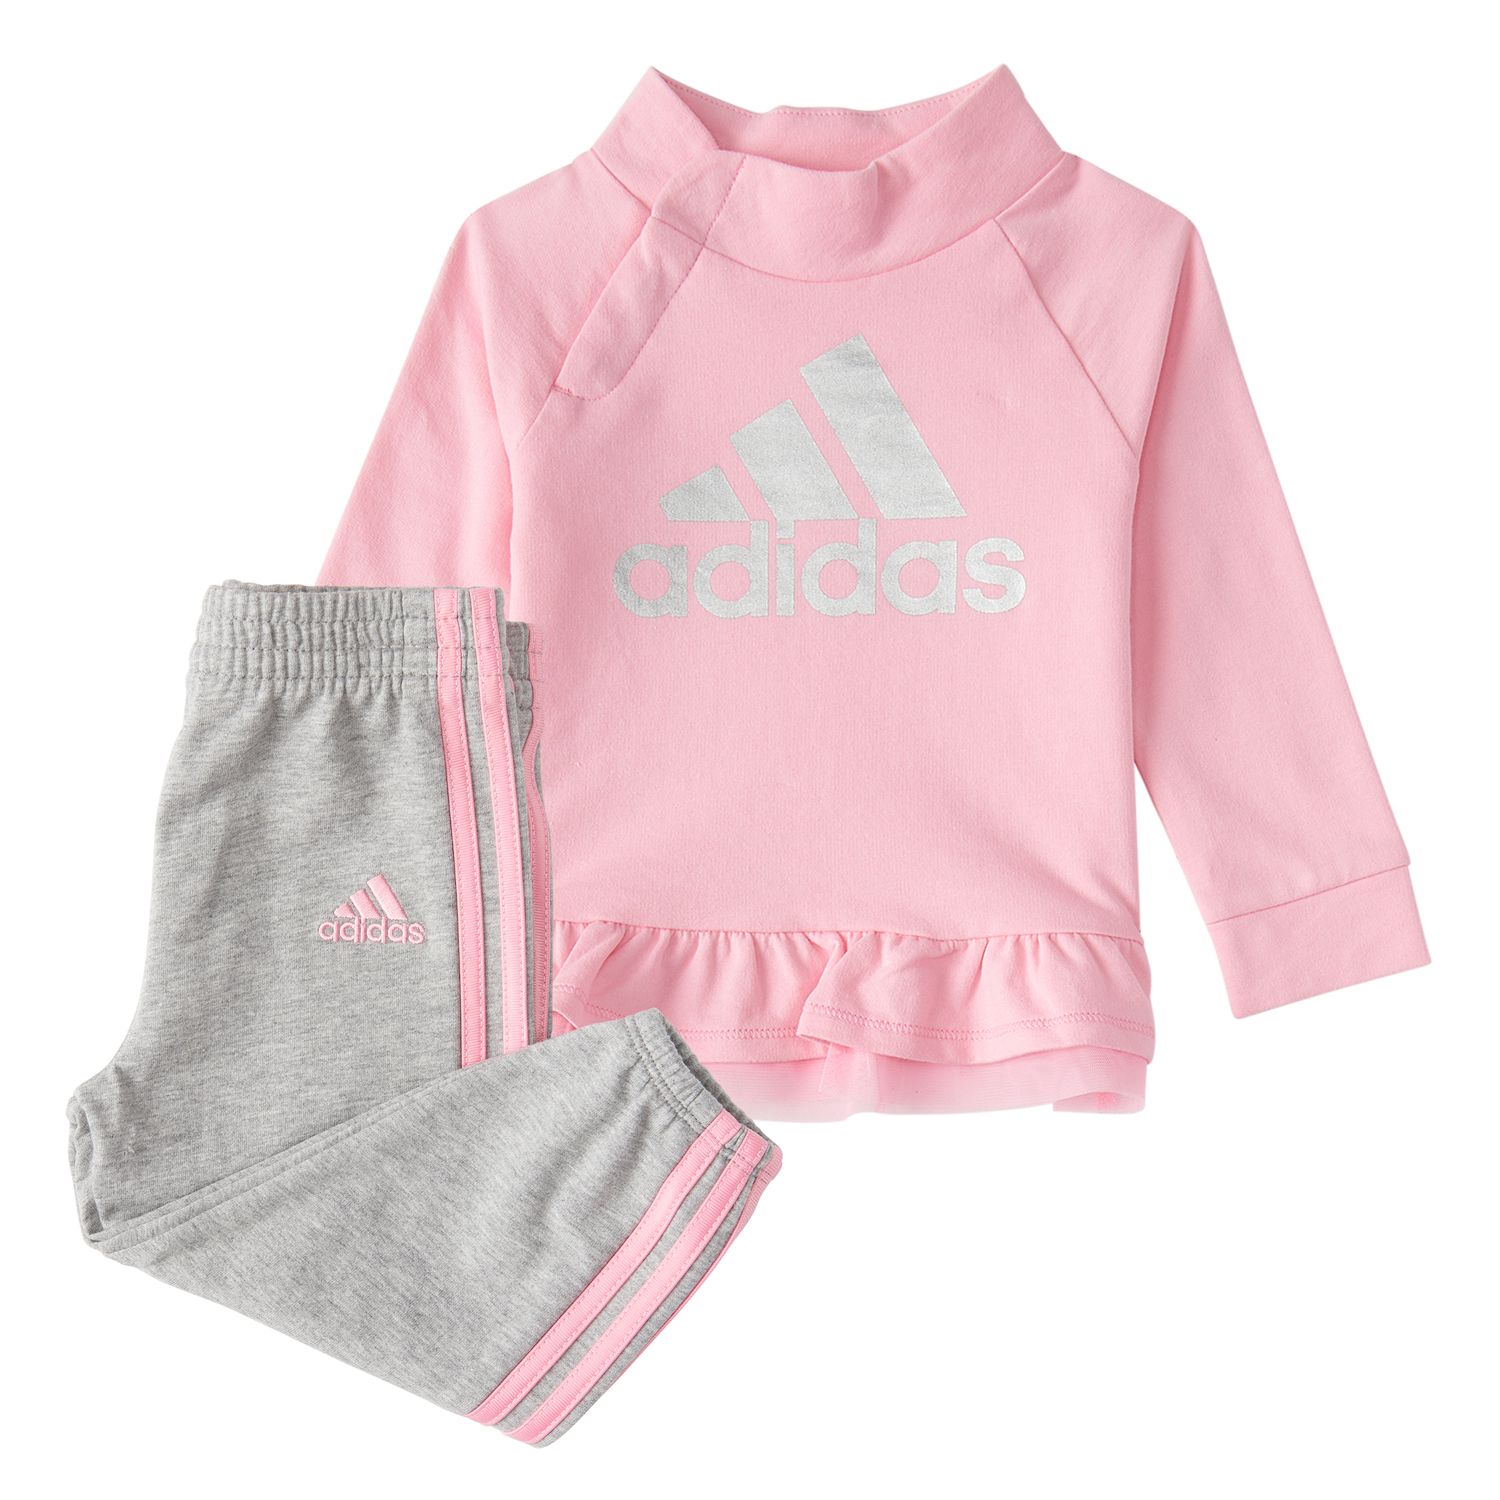 adidas clothes for baby girl